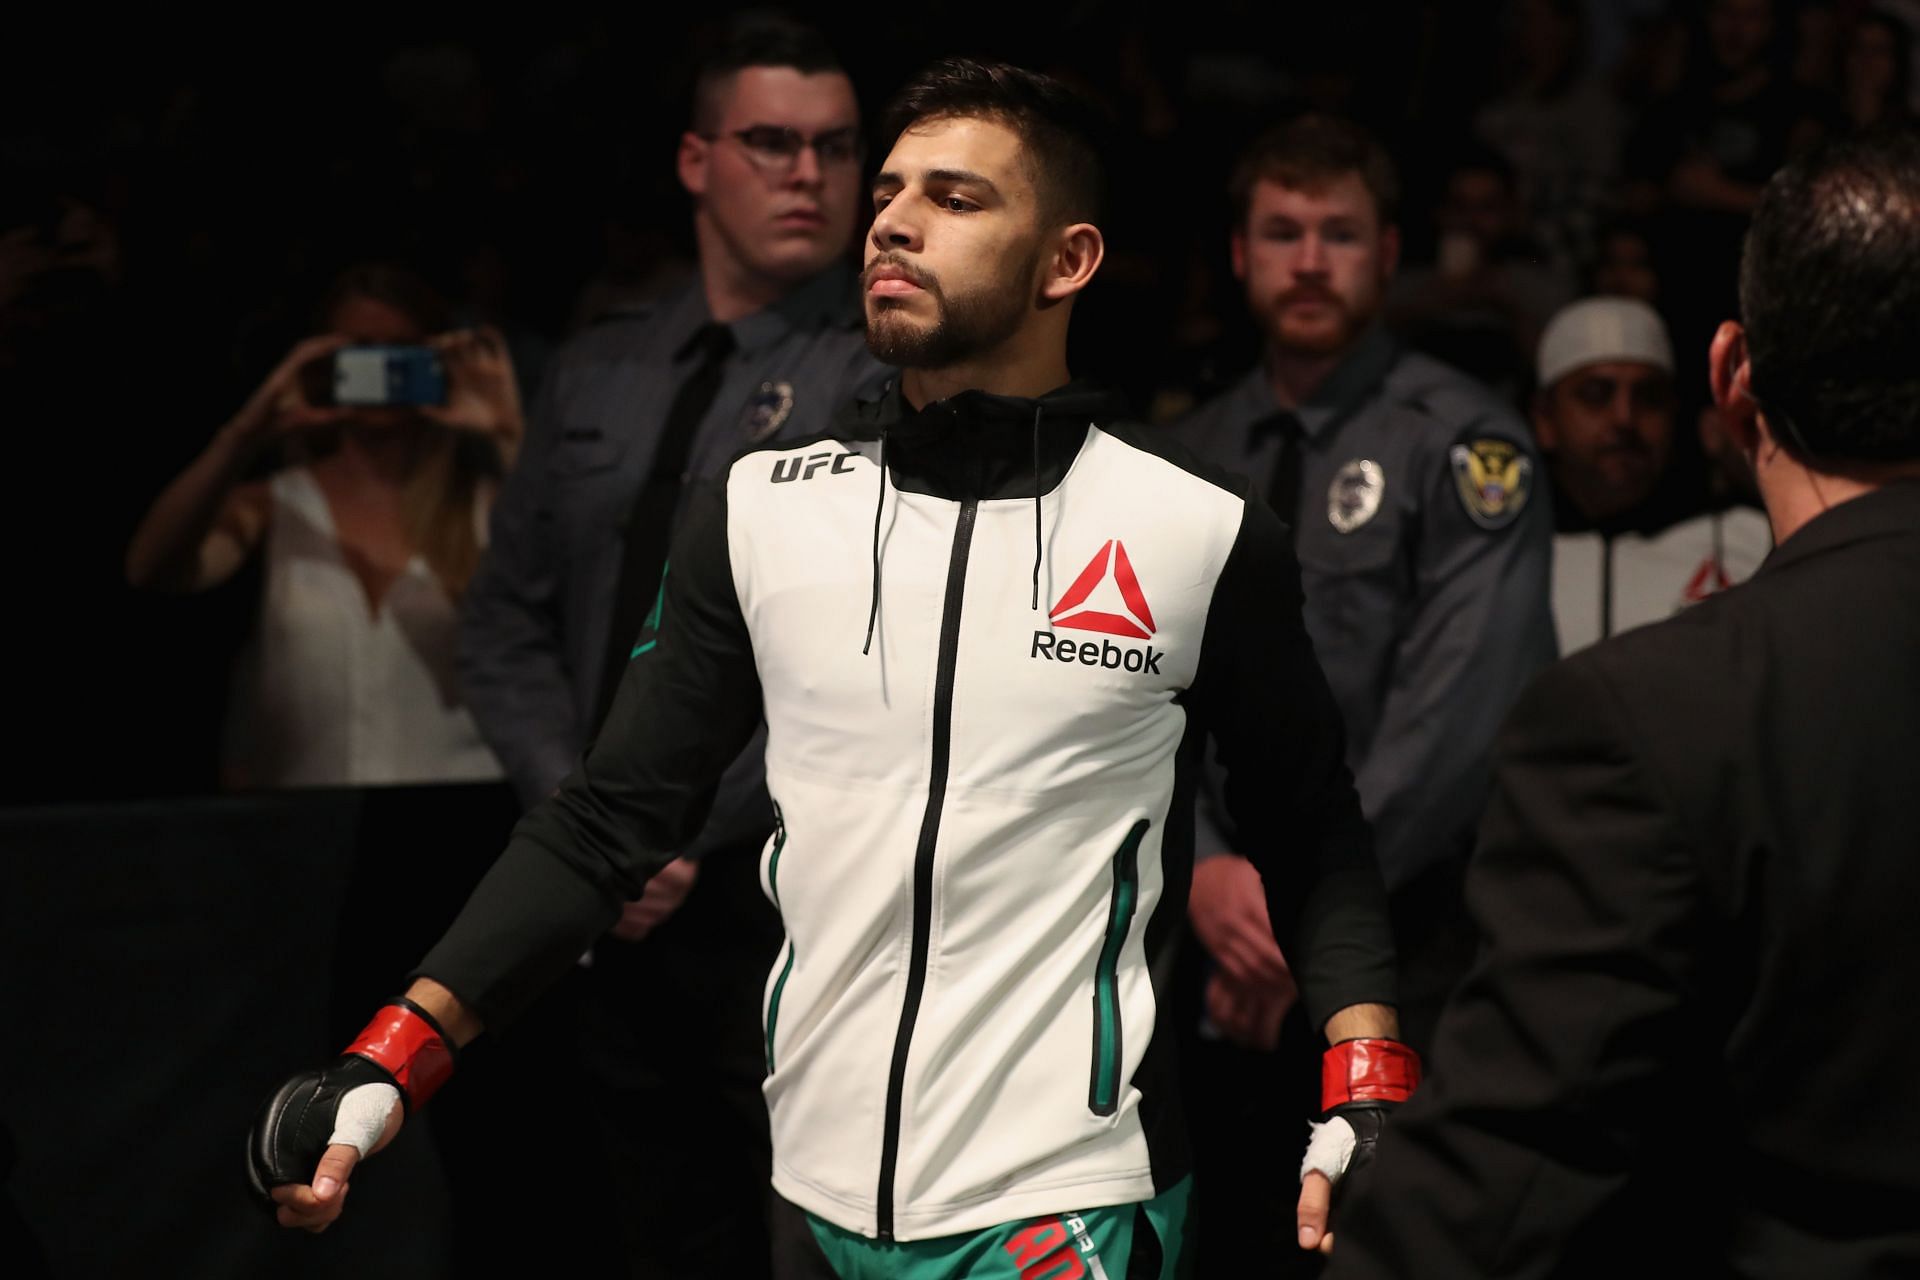 Yair Rodriguez is arguably too highly ranked at 145lbs